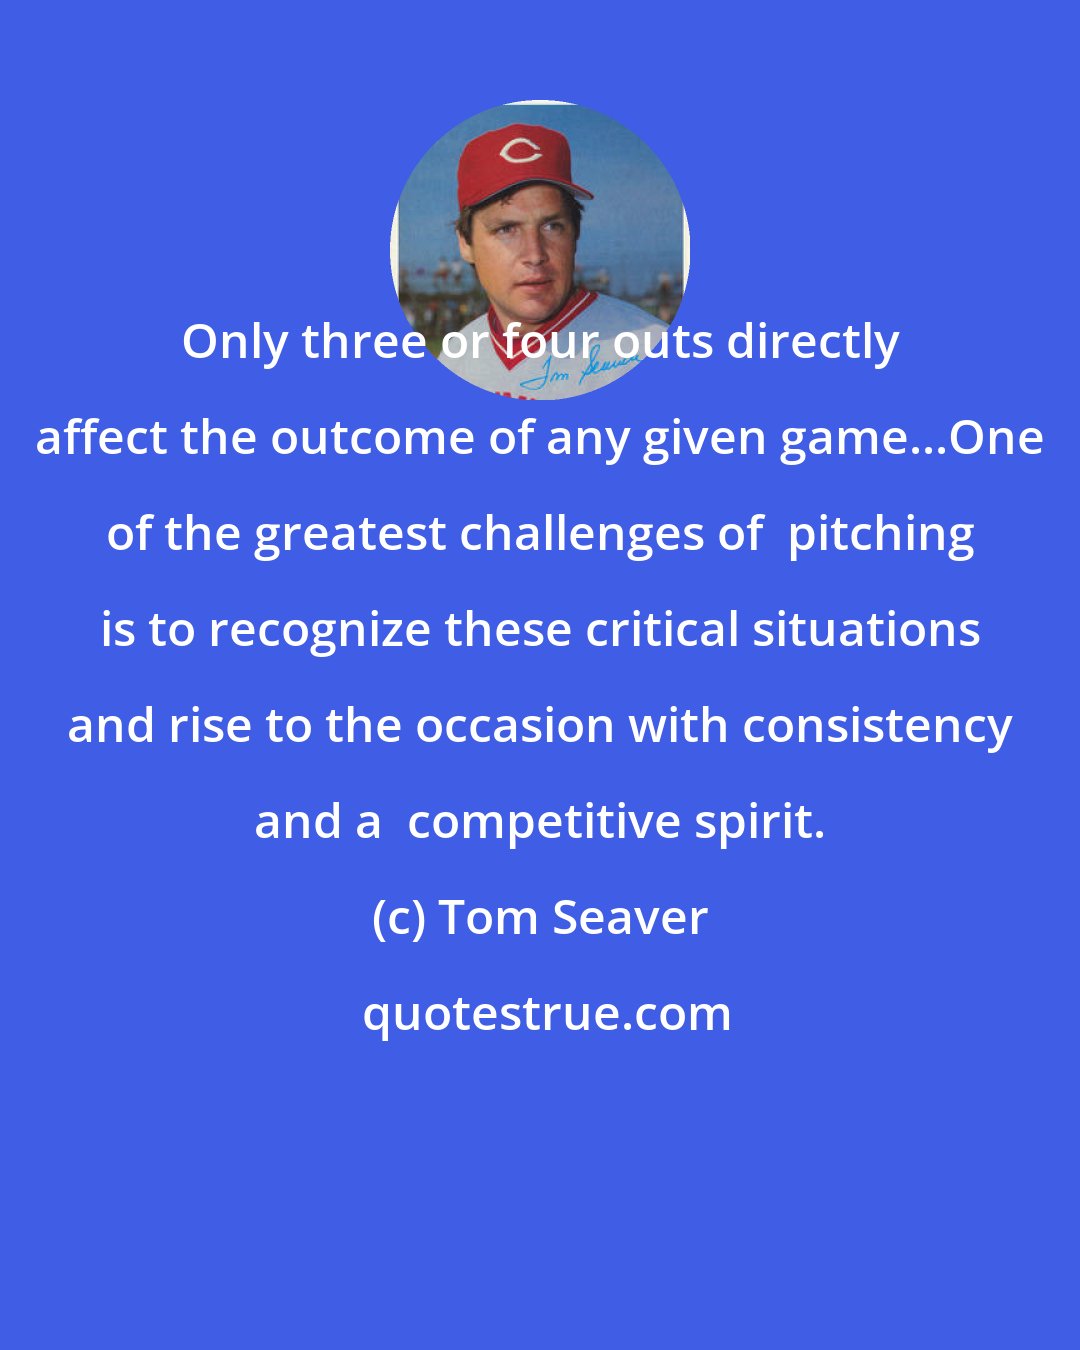 Tom Seaver: Only three or four outs directly affect the outcome of any given game...One of the greatest challenges of  pitching is to recognize these critical situations and rise to the occasion with consistency and a  competitive spirit.